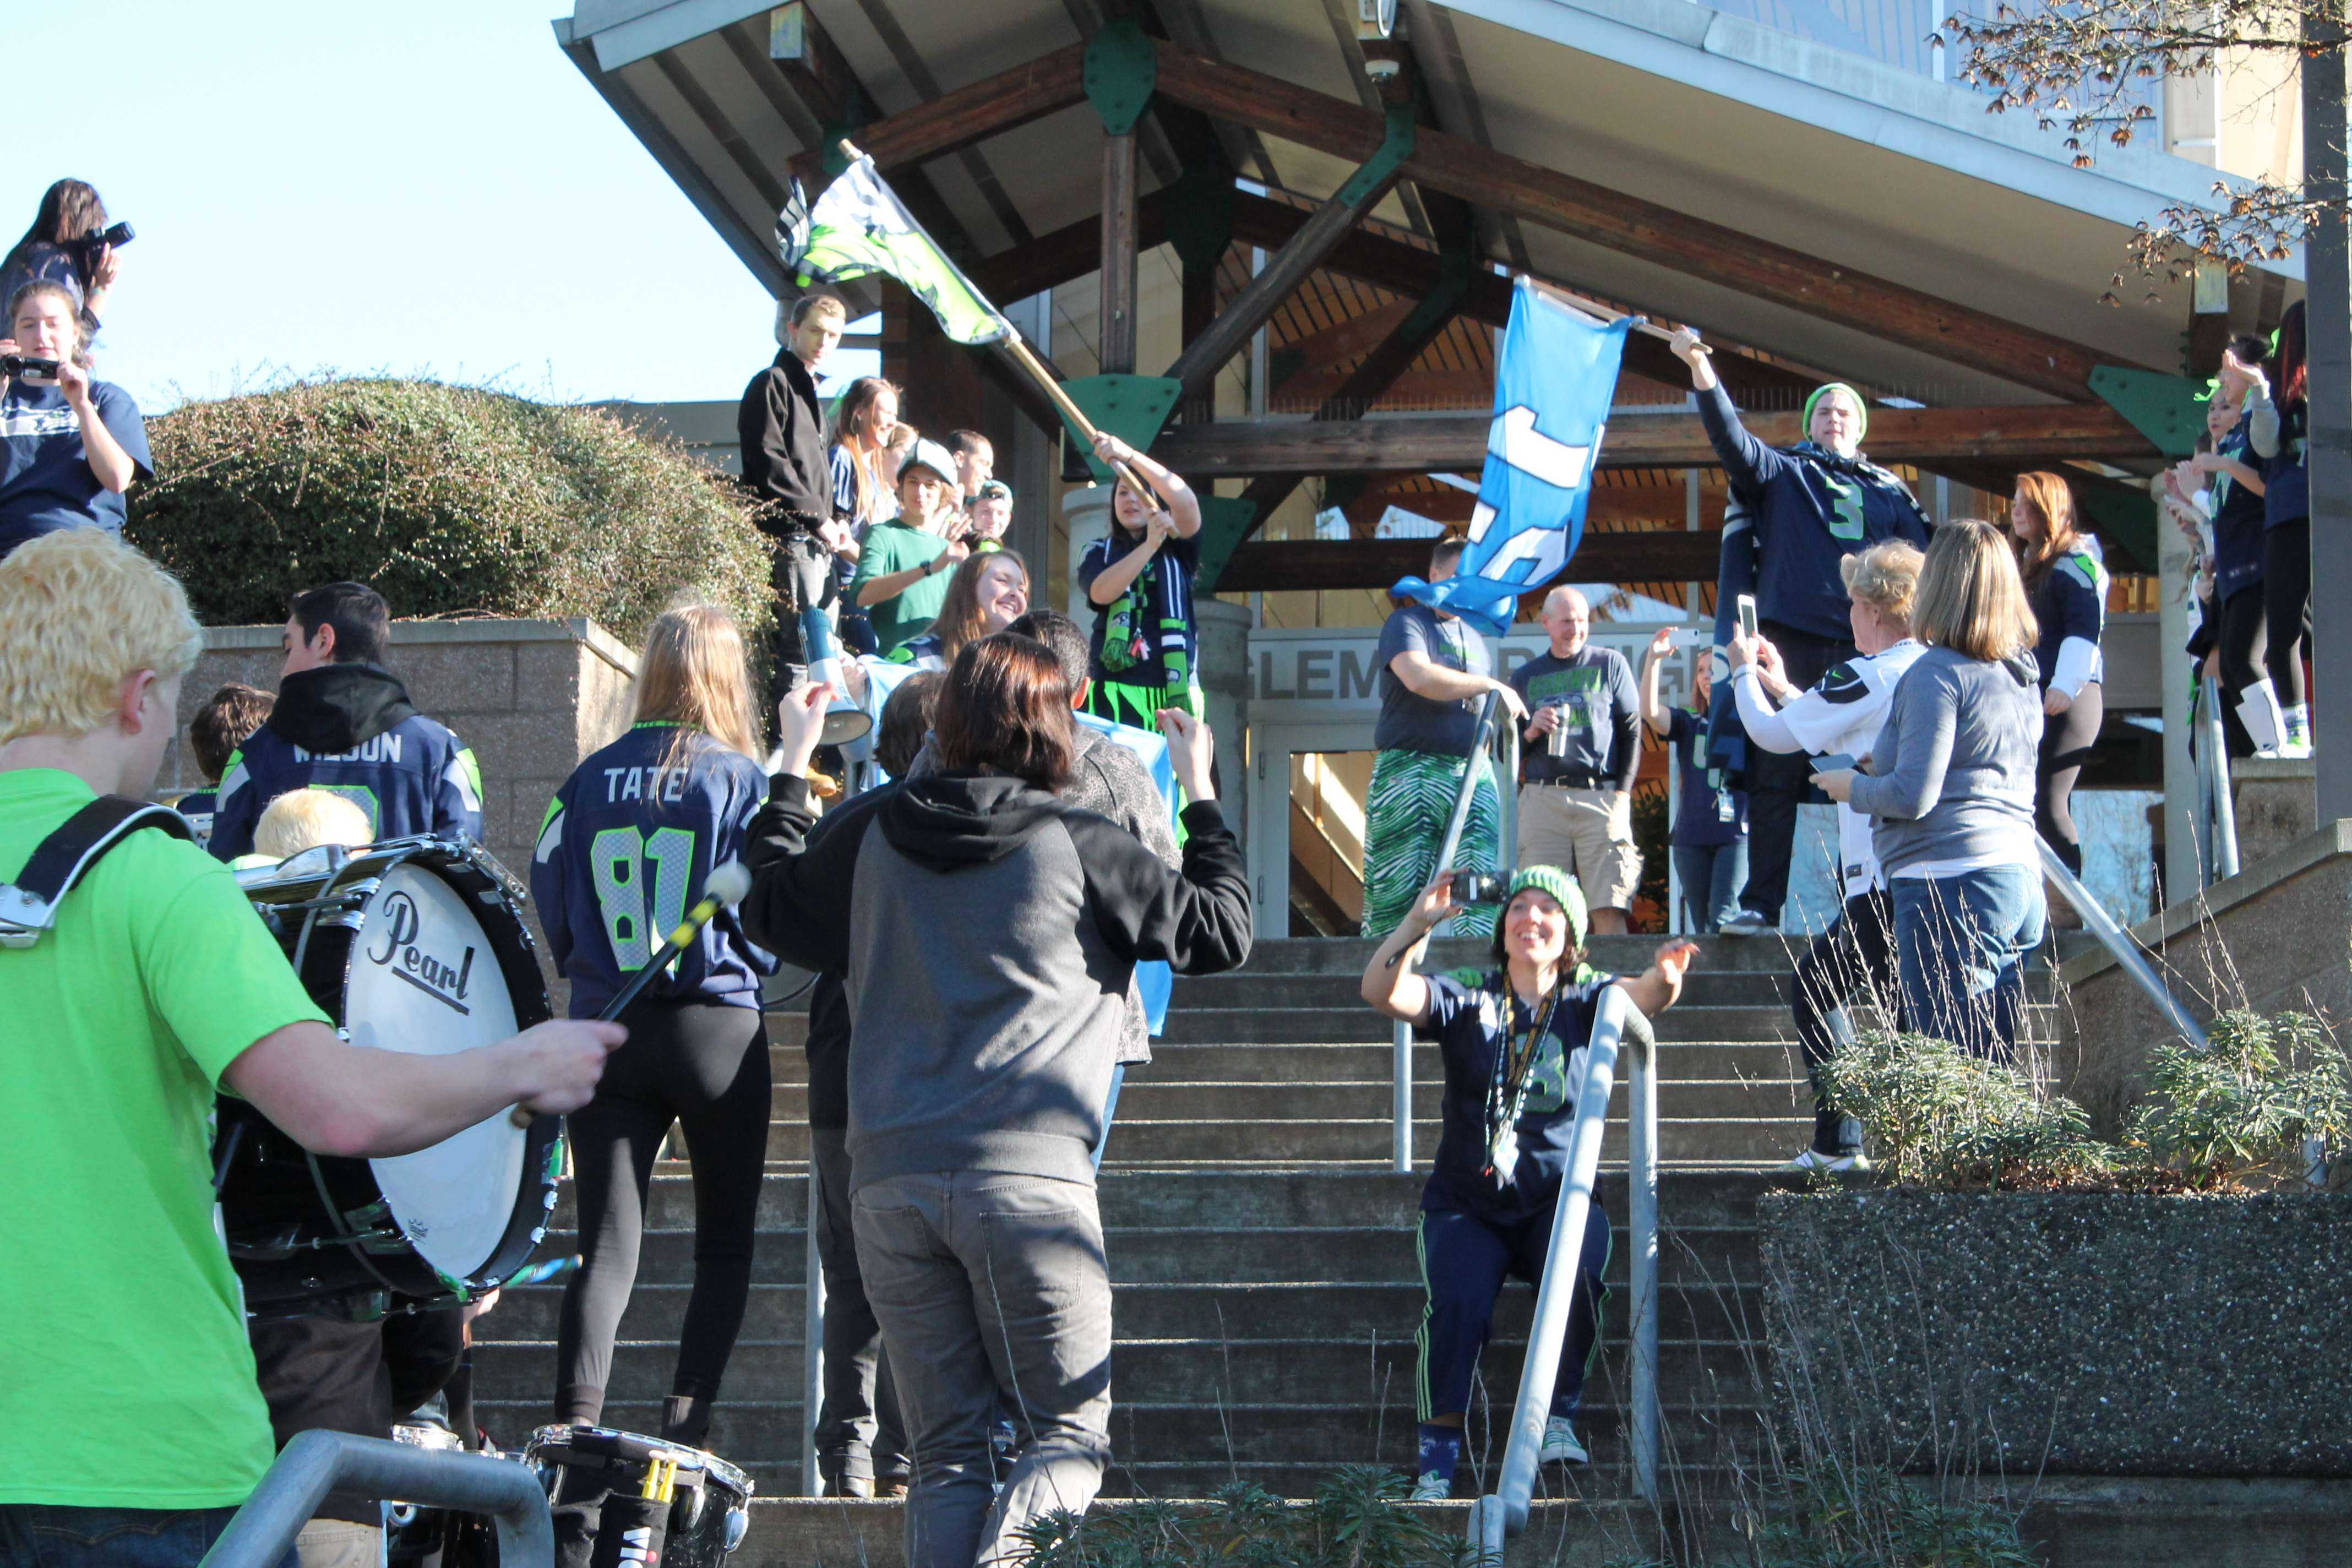 Students+parade+on+the+main+staircase+during+the+Seahawks+assembly+on+Jan.+30.++The+entire+event+demonstrated+the+spirit+of+Inglemoor%2C+as+enthusiastic+fans+dressed+up+in+full+blue+and+green+attire+and+brought+flags%2C+hats+and+jerseys+to+show+their+support.++It+shows+the+power+of+a+strong+fan-base%2C+a+power+that+will+hopefully+carry+over+to+the+upcoming+playoffs+in+which+all+five+sports+could+send+athletes+to+state.